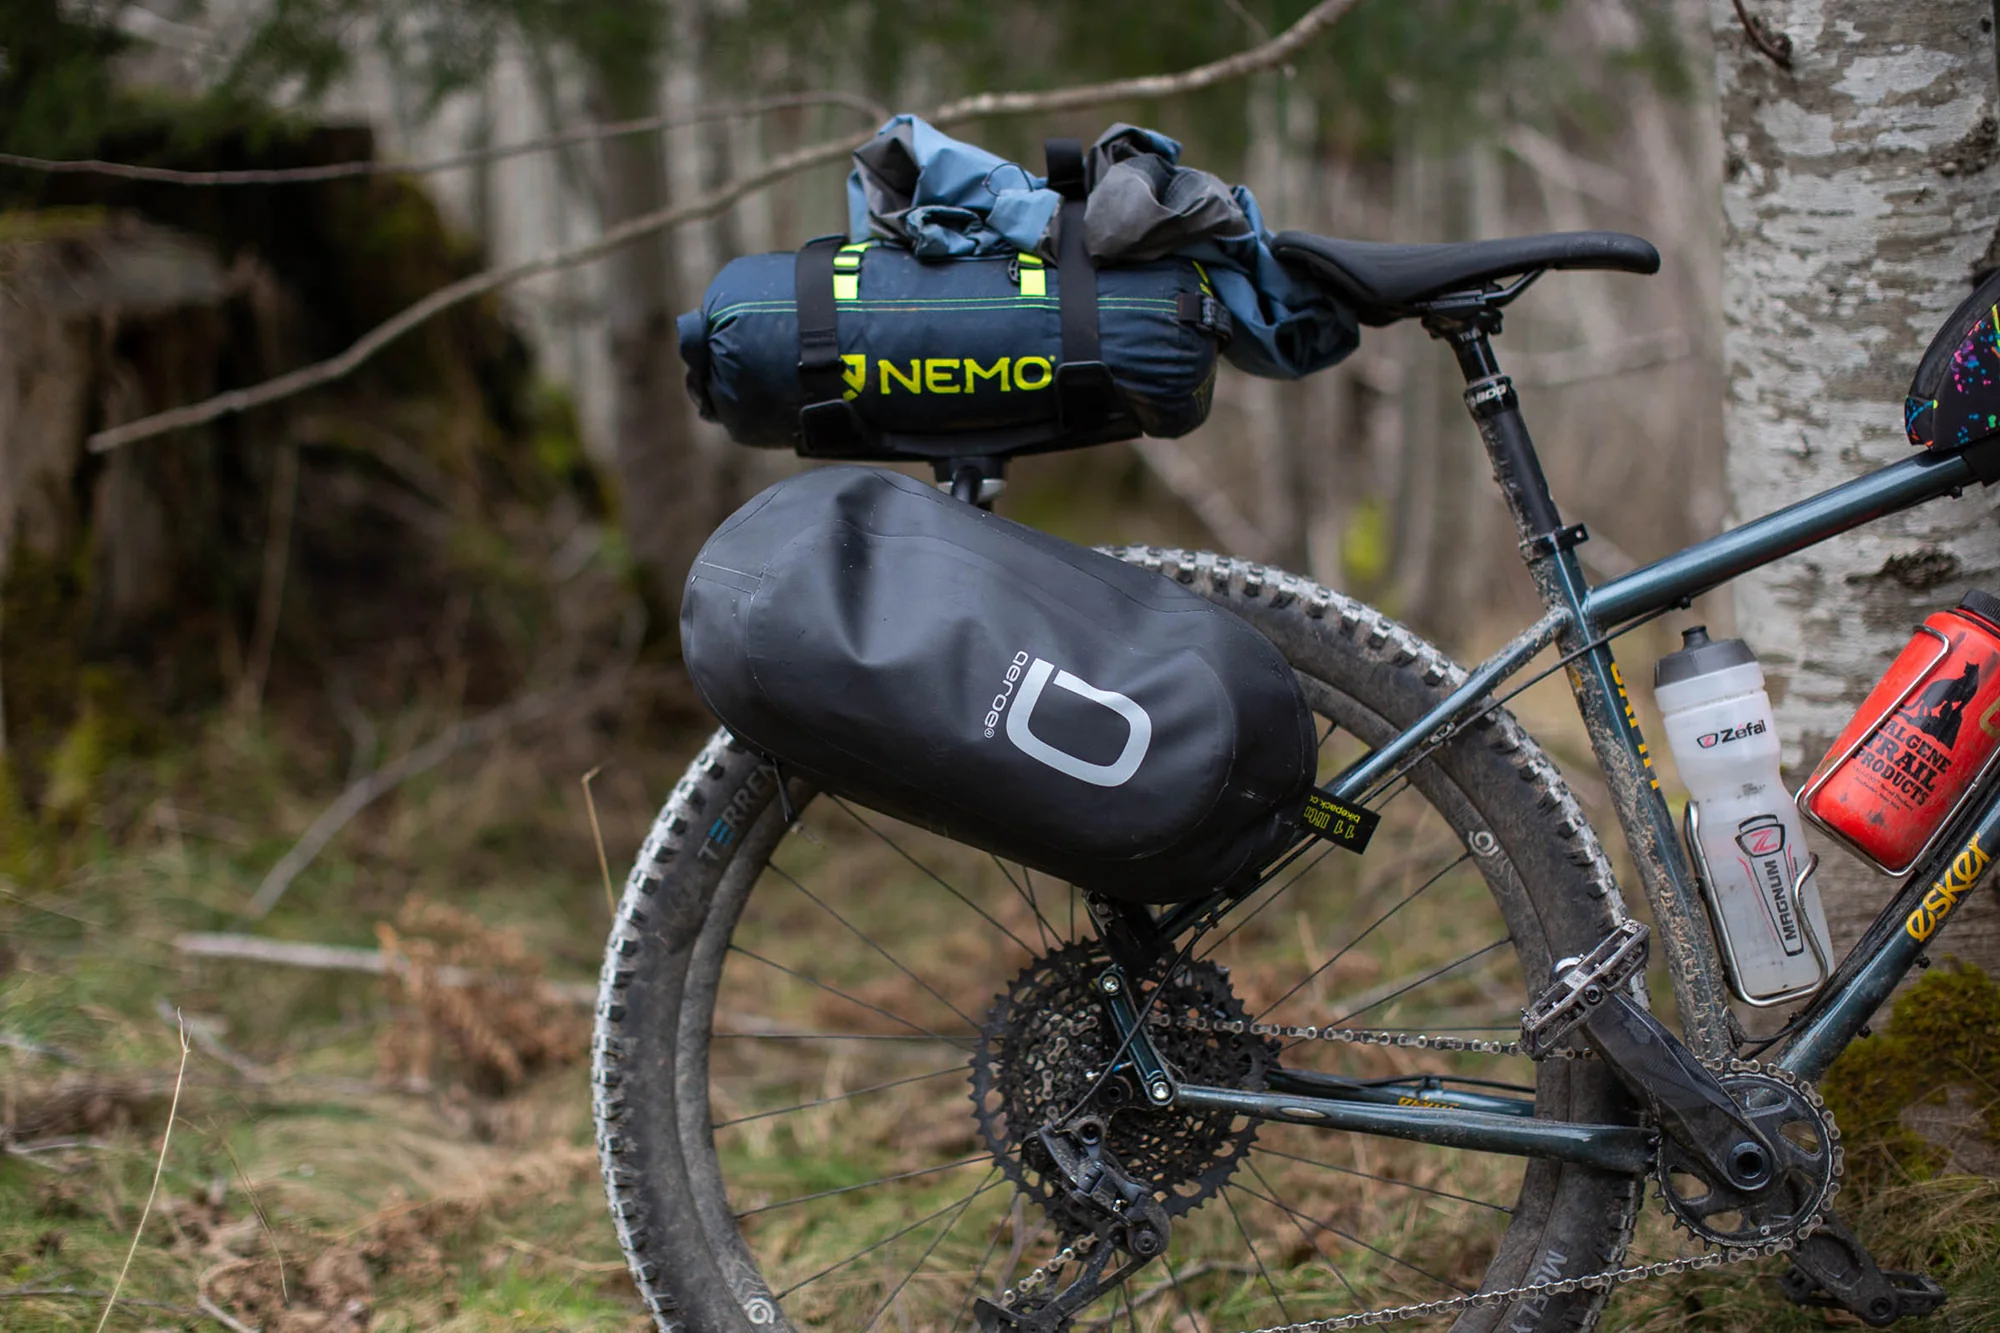 10 Bike Bags for Travel or Daily Use You Can Buy Online